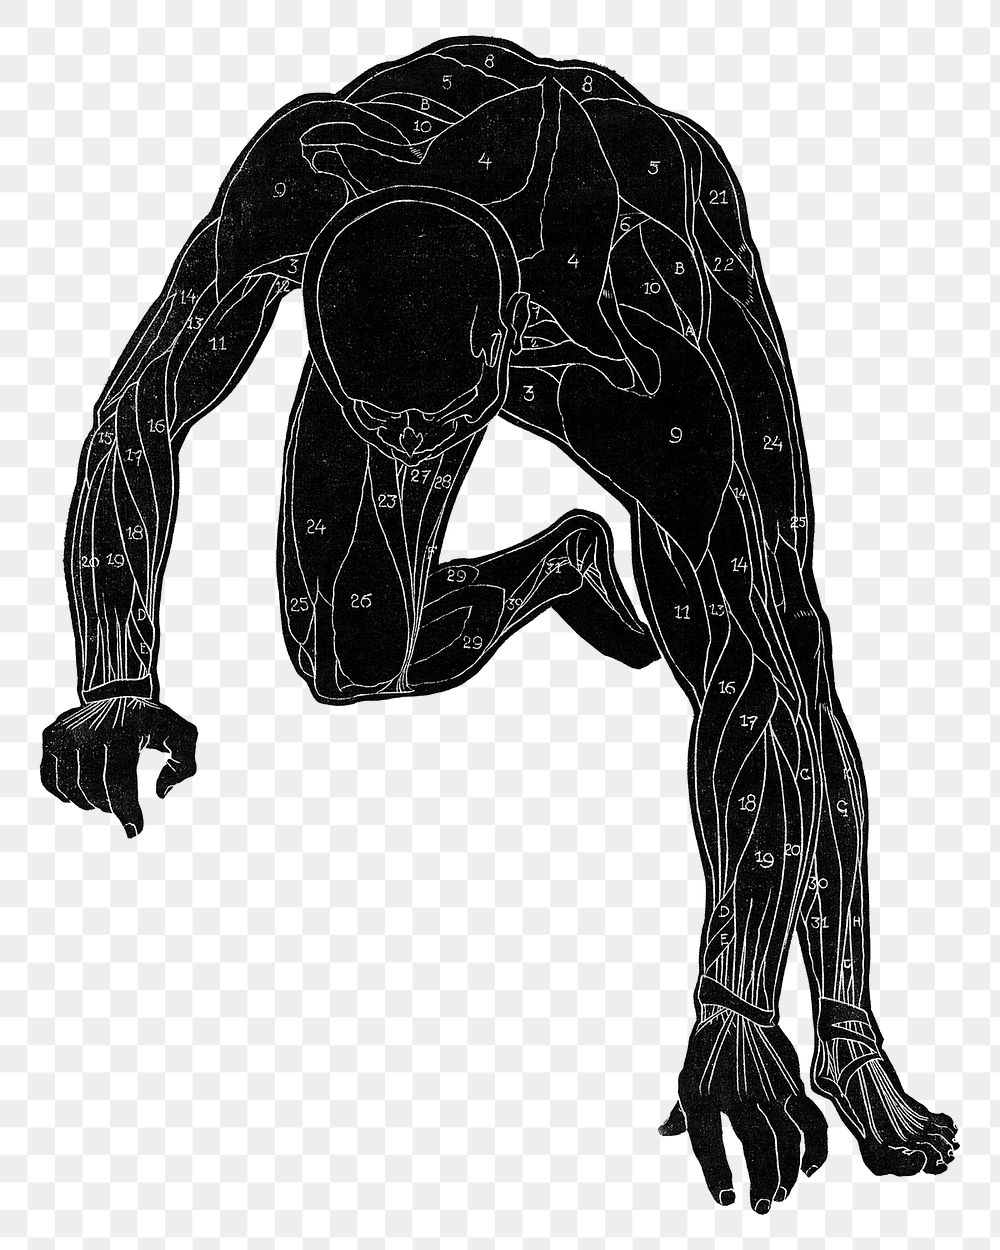 Human anatomy png in silhouette, remixed from artworks by Reijer Stolk